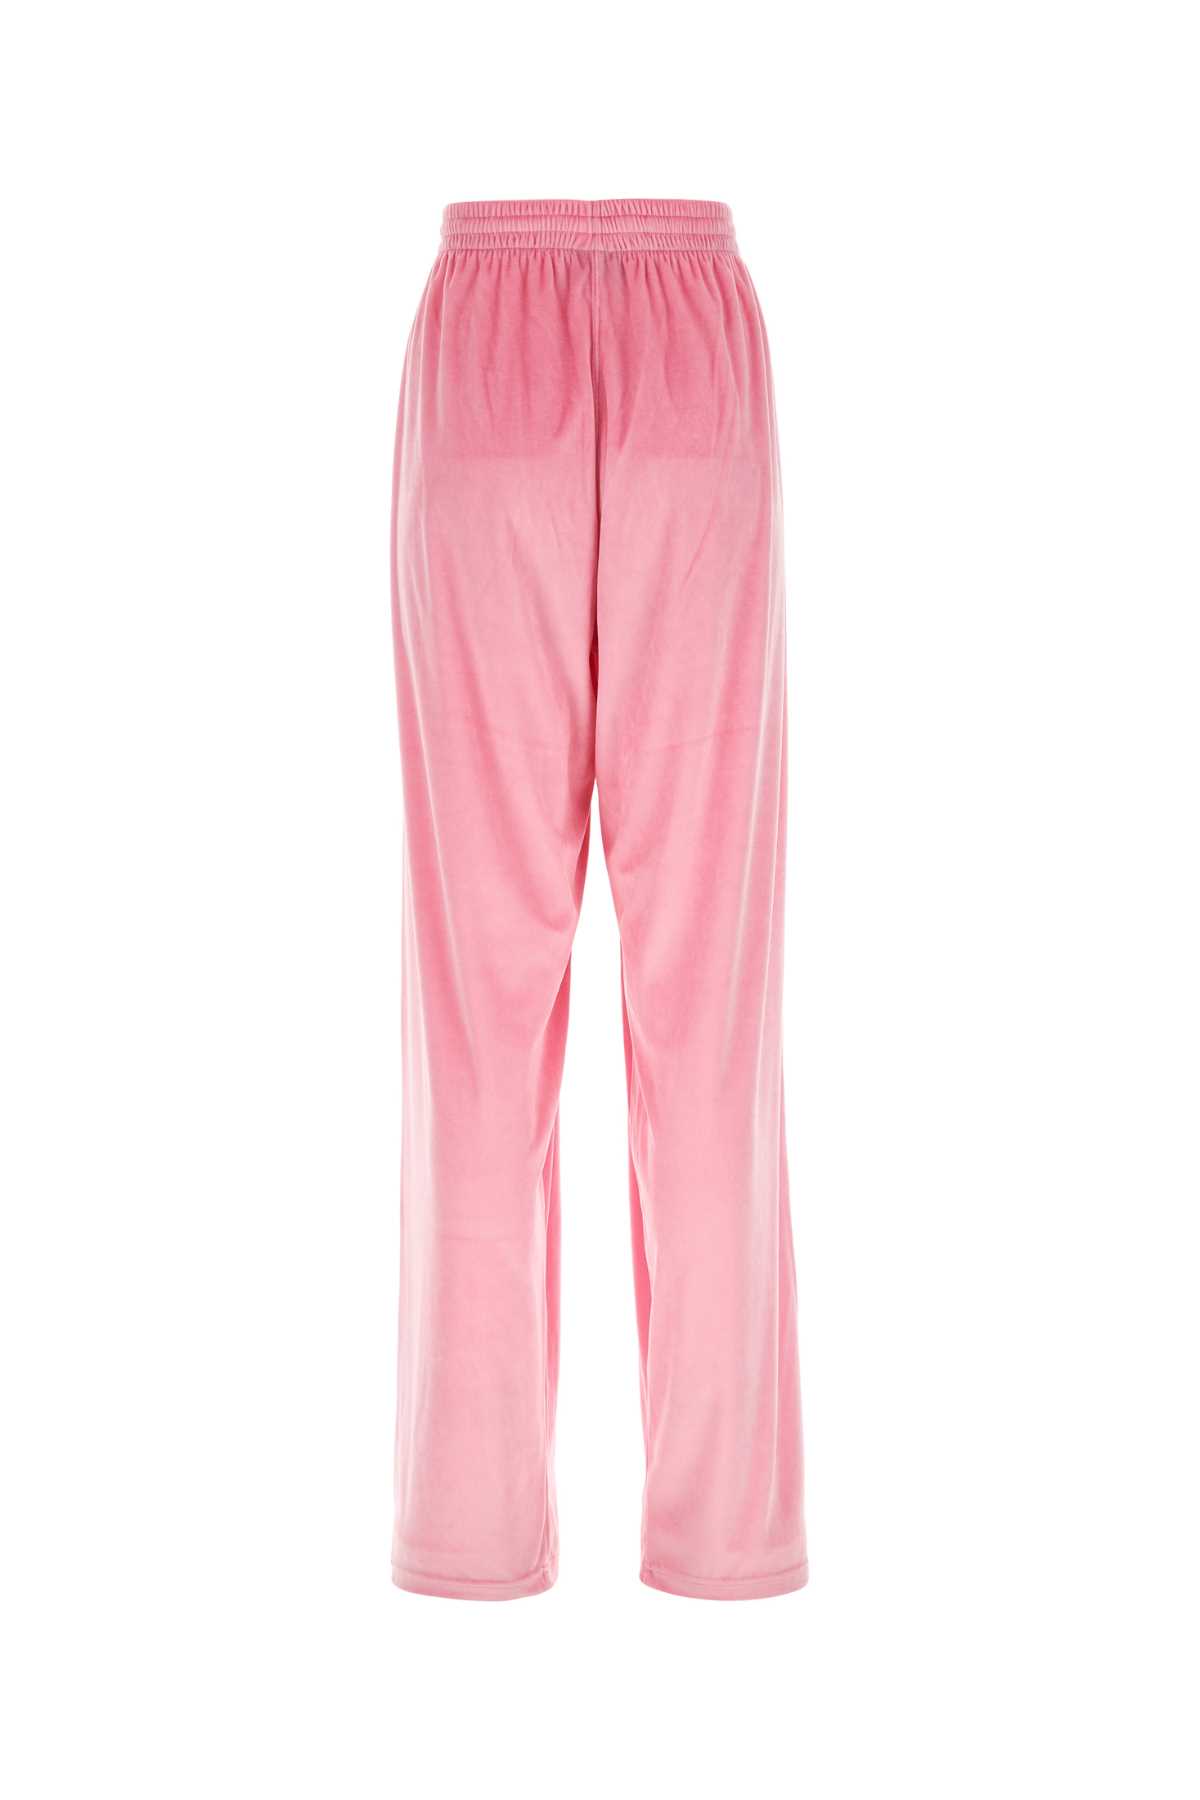 Balenciaga Pink Stretch Velvet Baggy Pant In 5630